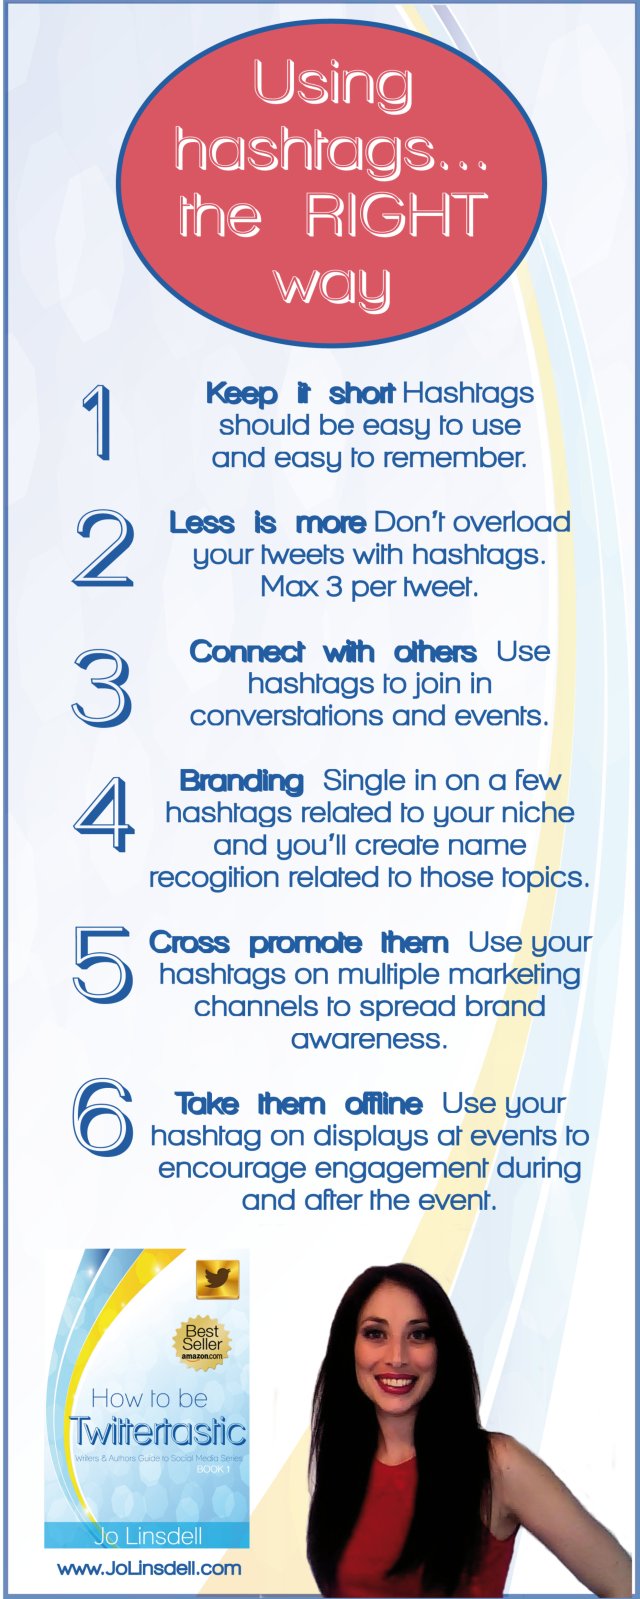 using hashtags the right way infographic2